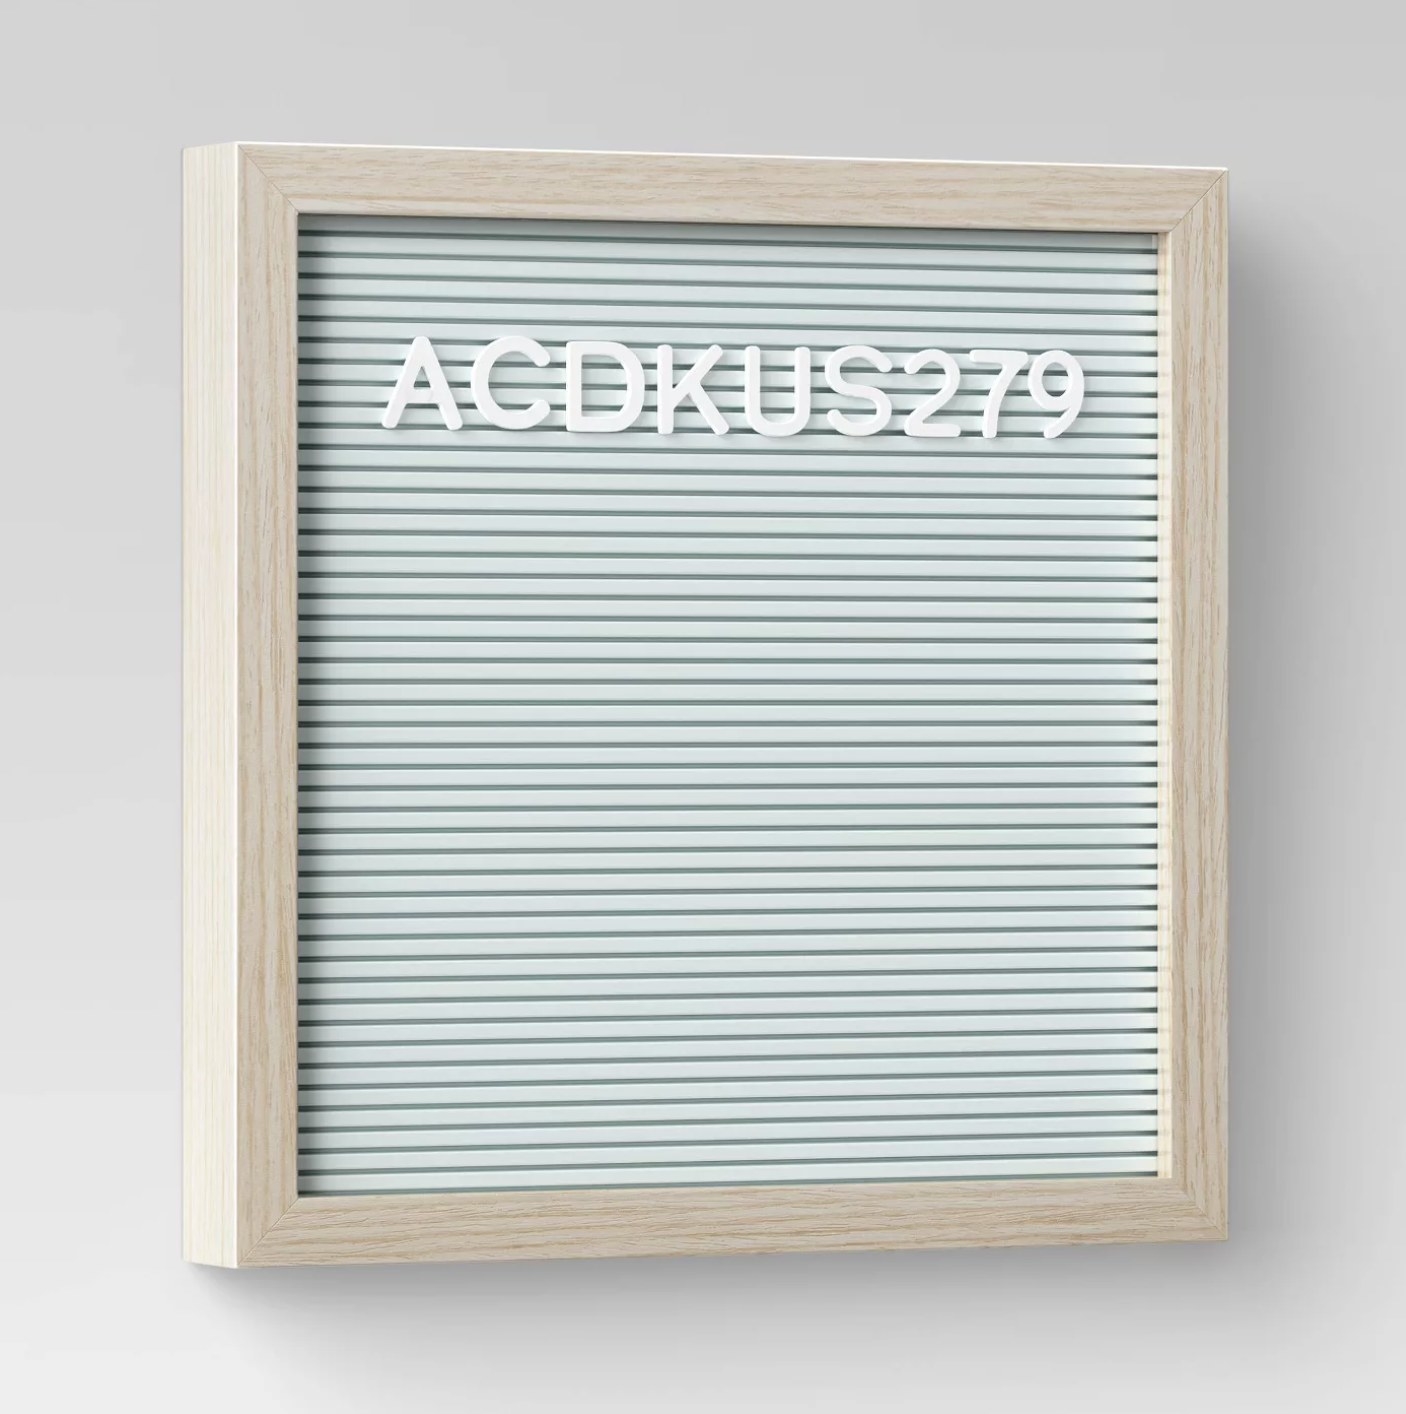 The mint felt letter board with a light wood frame